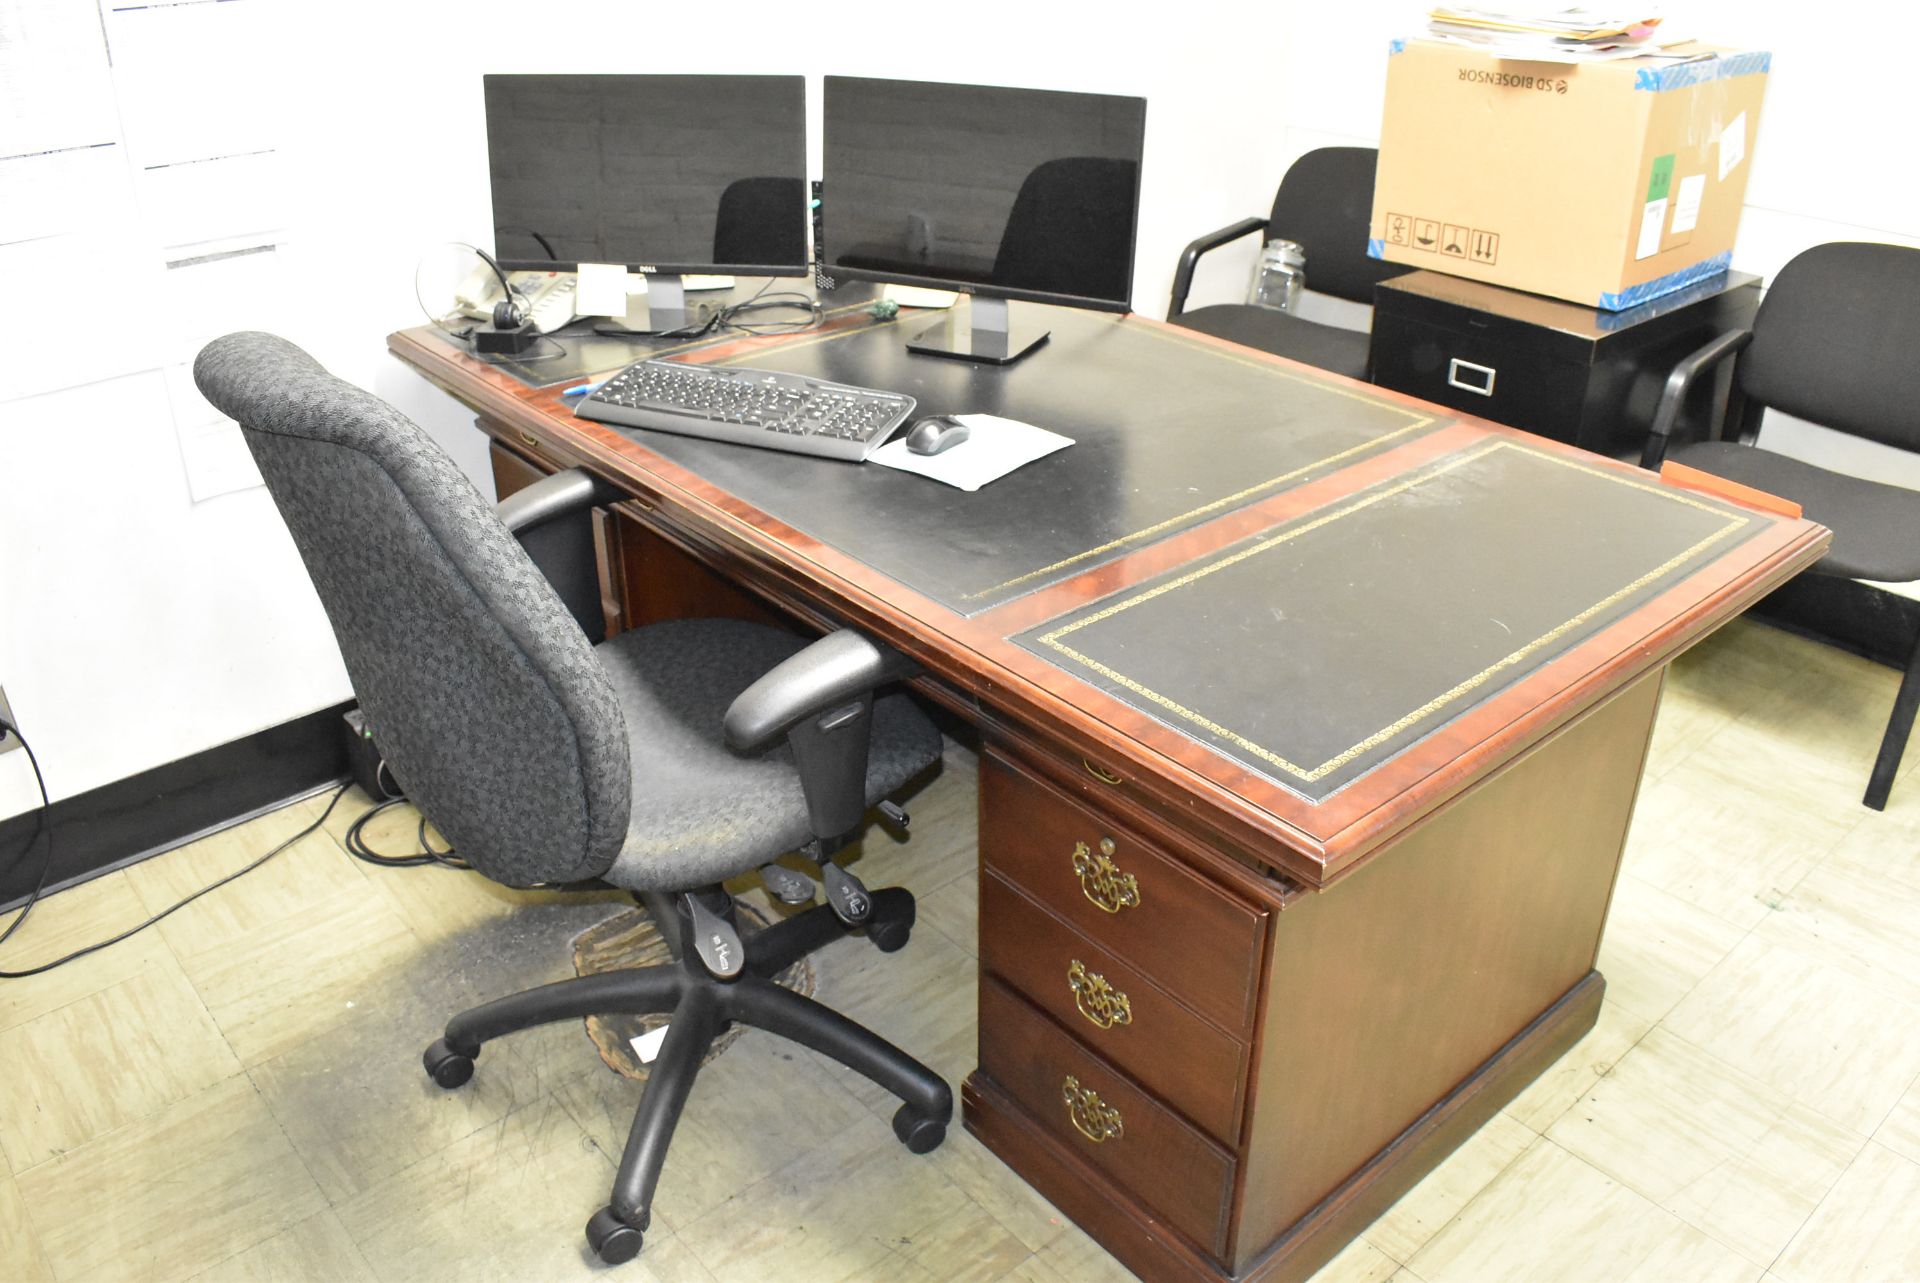 LOT/ CONTENTS OF OFFICE (FURNITURE ONLY) - INCLUDING (2) DESKS, OFFICE CHAIR, (2) WAITING ROOM - Image 3 of 4